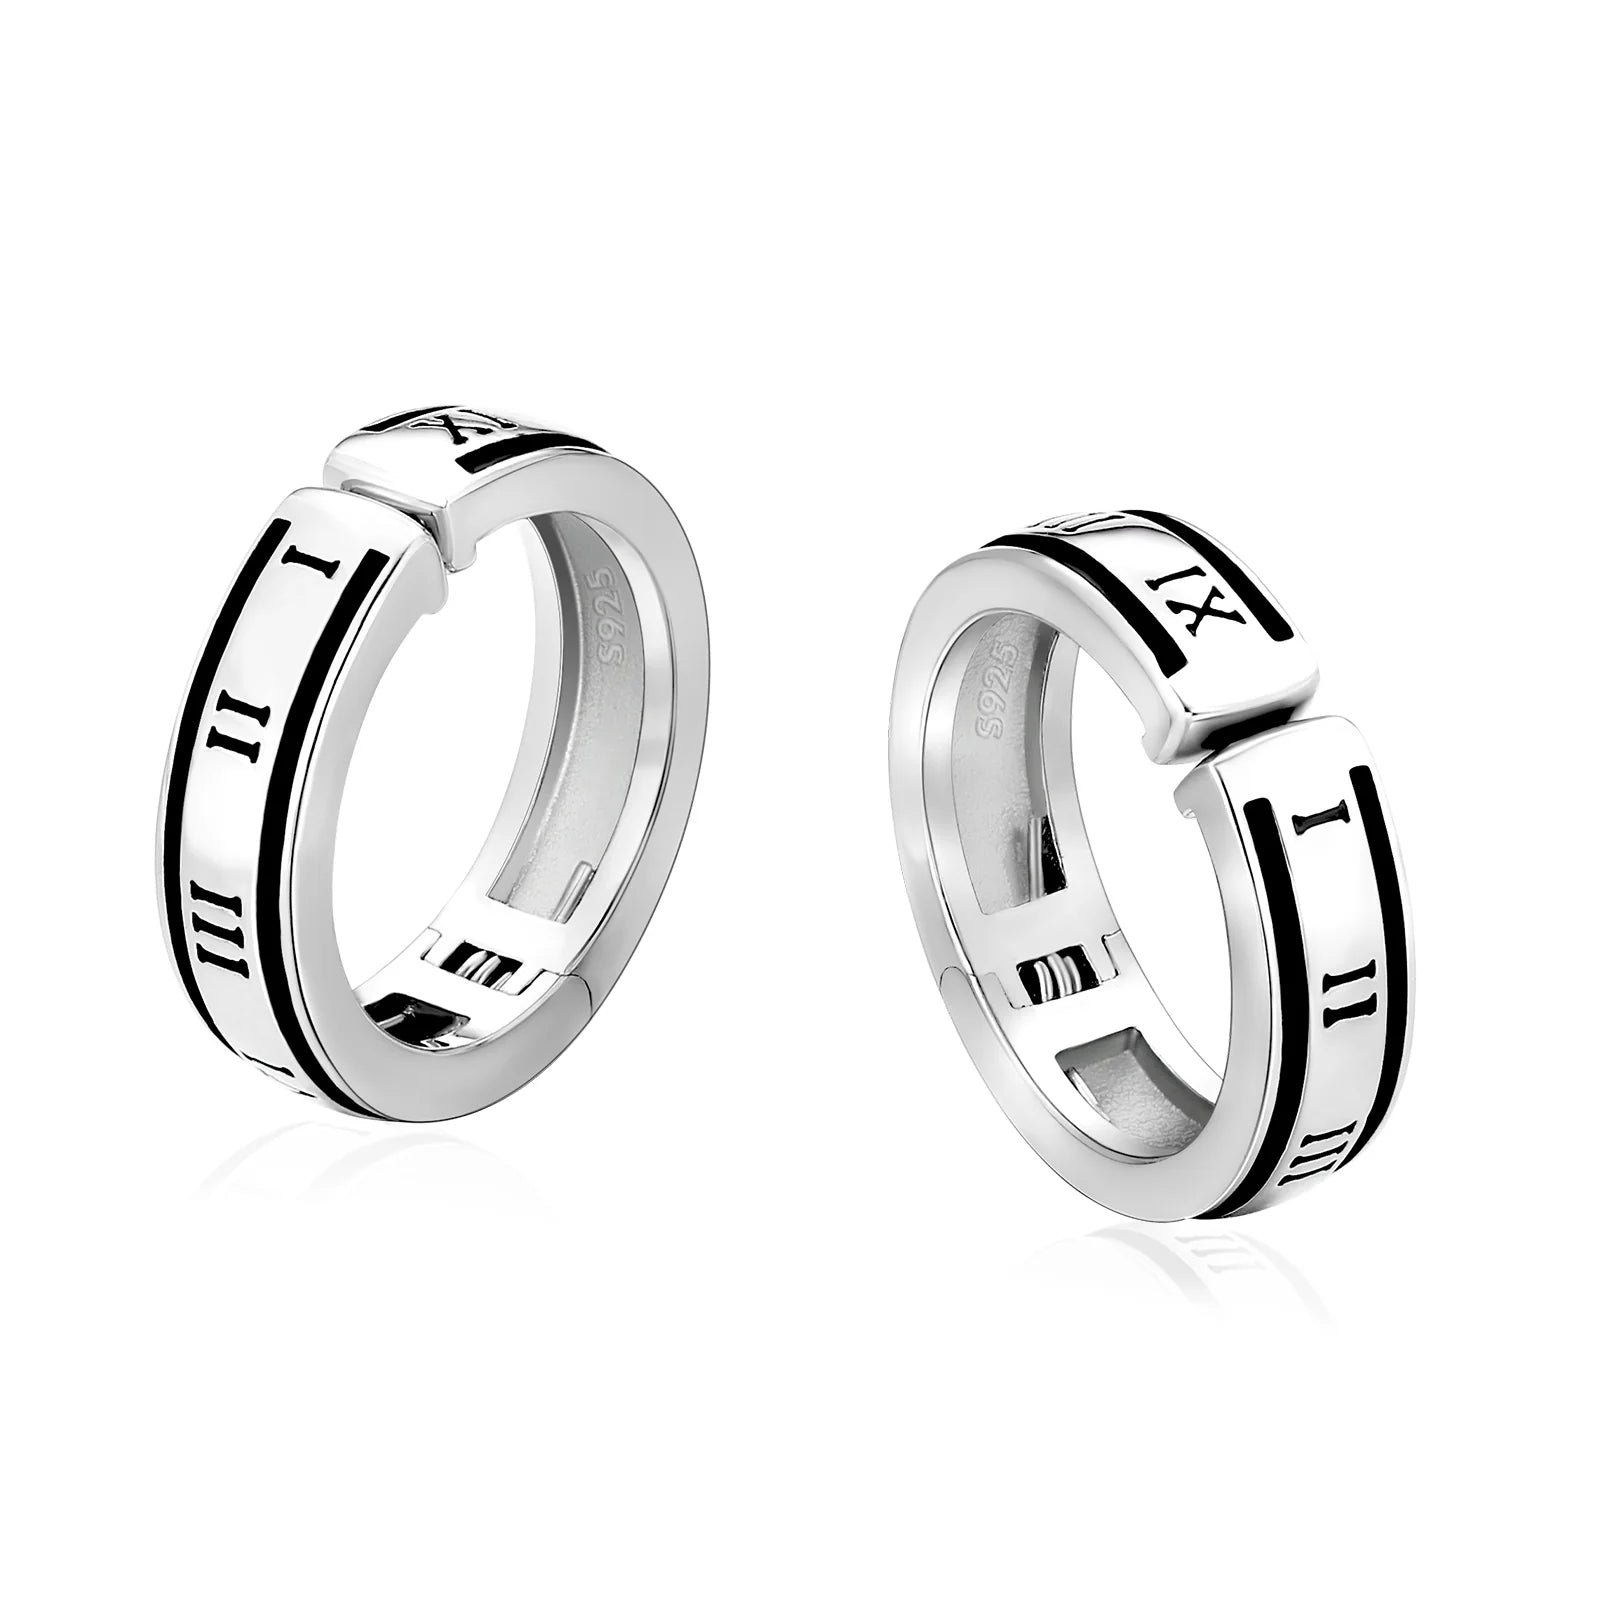 925 Sterling Silver Hoop Ear Cuff with Roman Numerals Printed in White Gold Earrings 